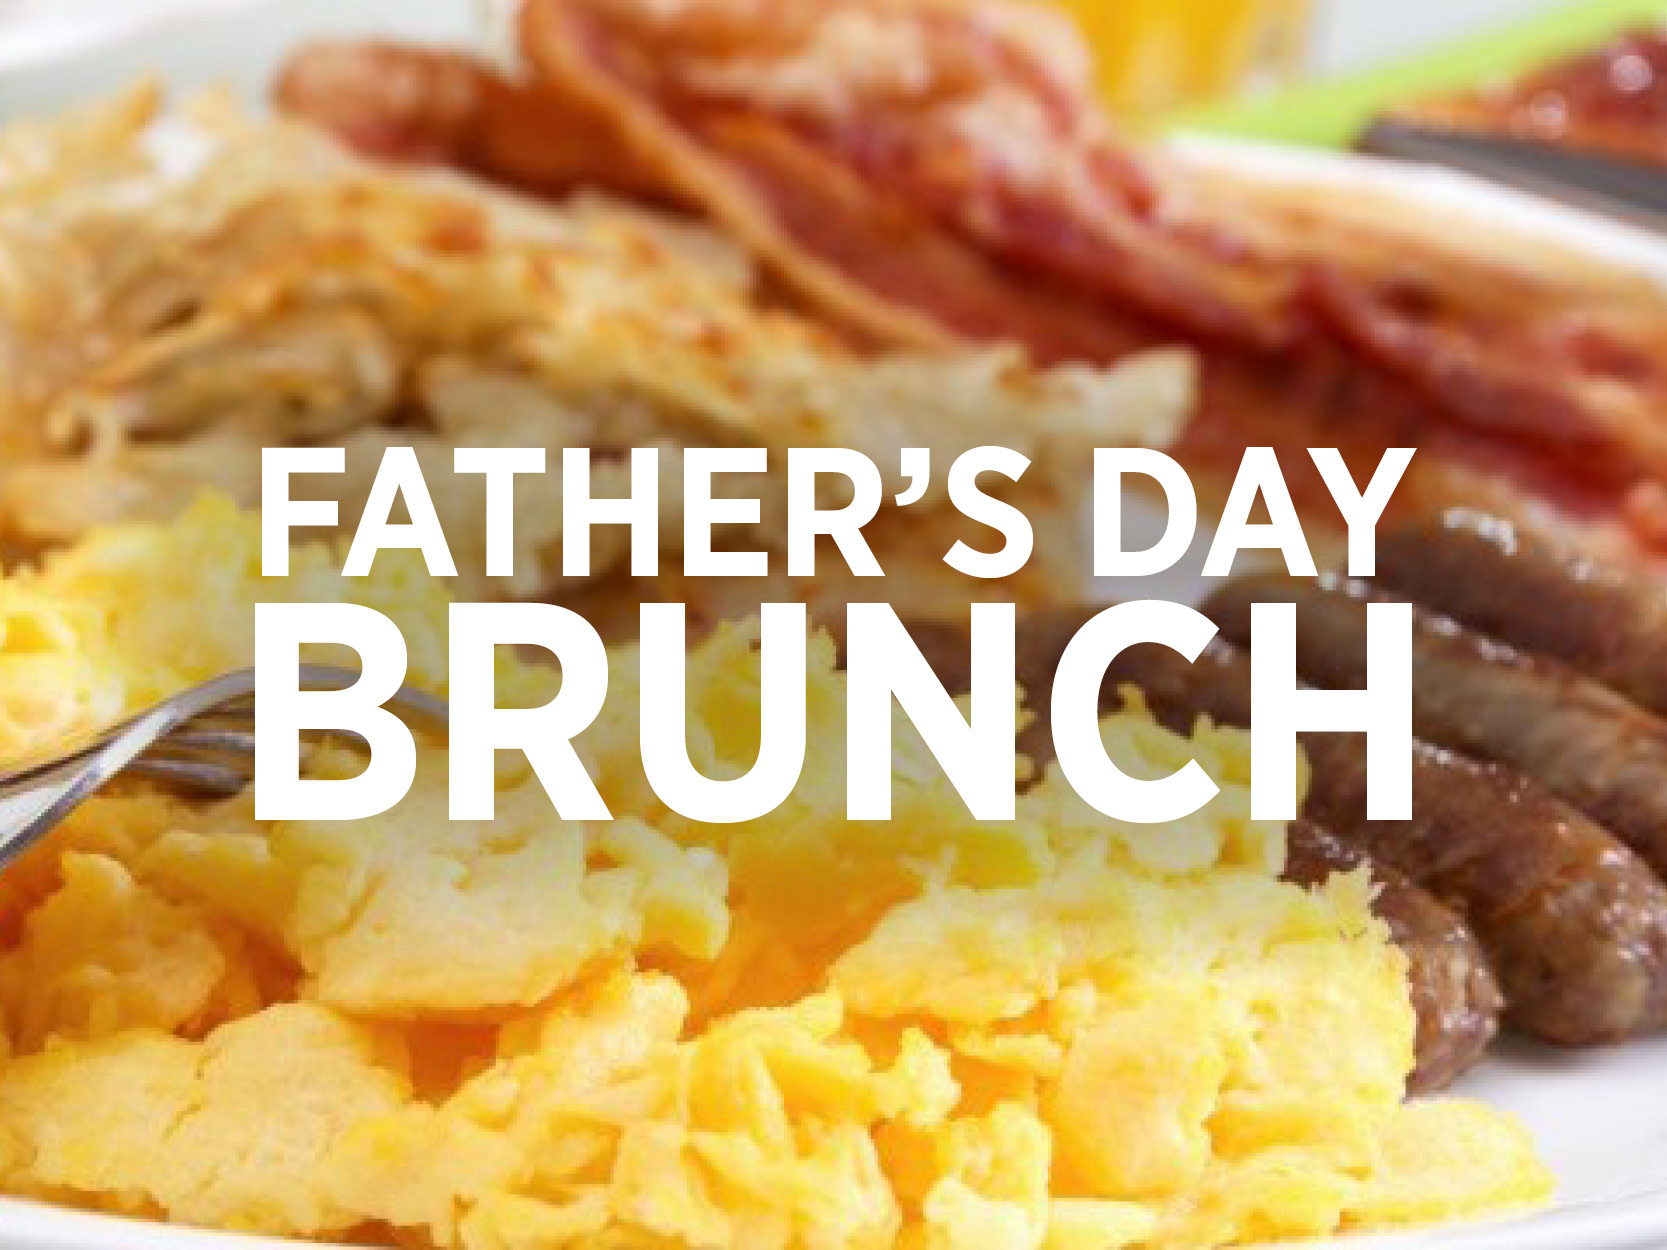 Father's Day Brunch 2018 at Desmond's Restaurant and Pub